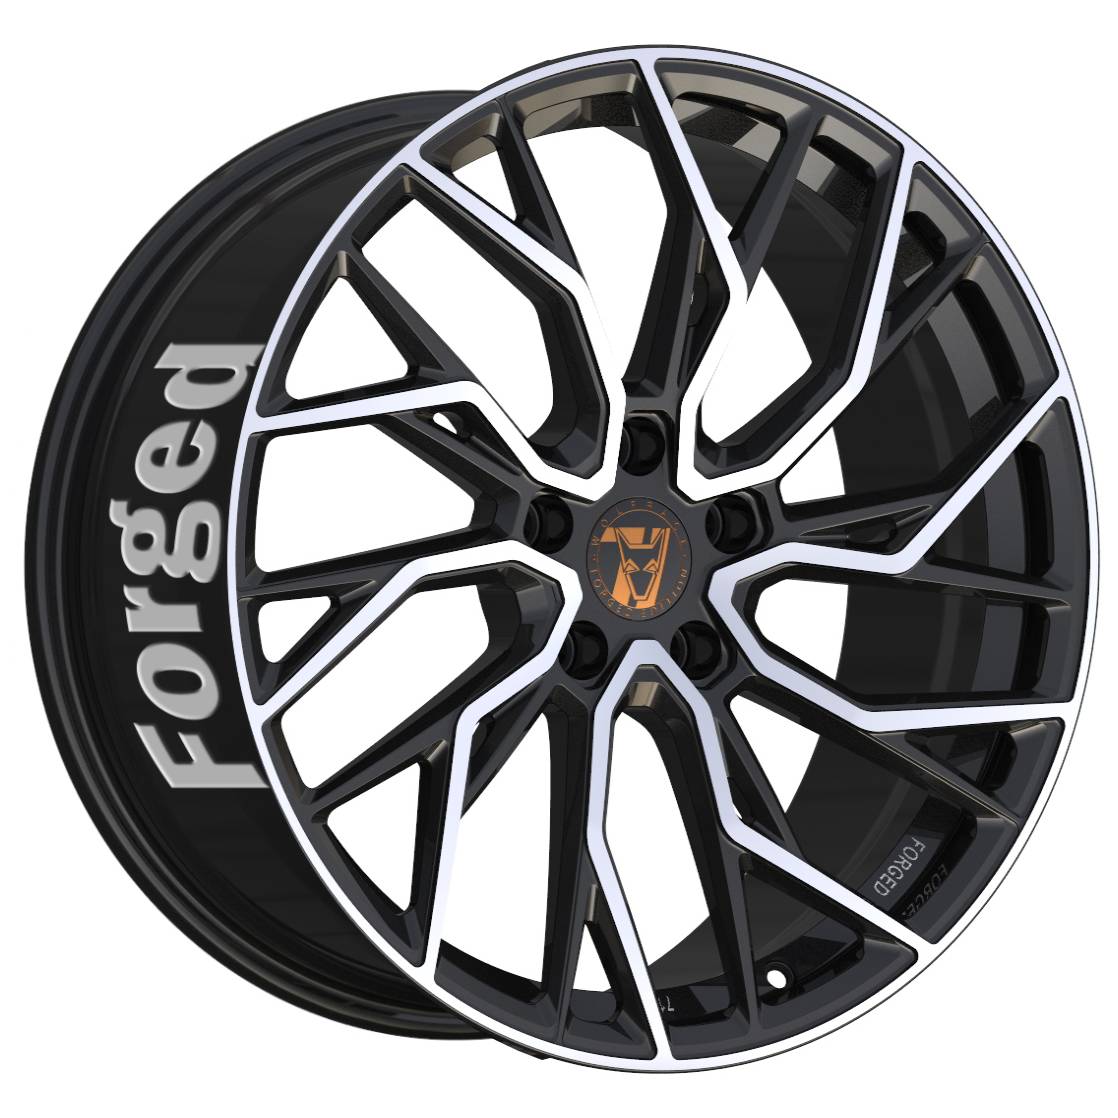 Demon Wheels 71 Forged Edition Voodoo Forged [10.5x24] -5x114.3- ET 45